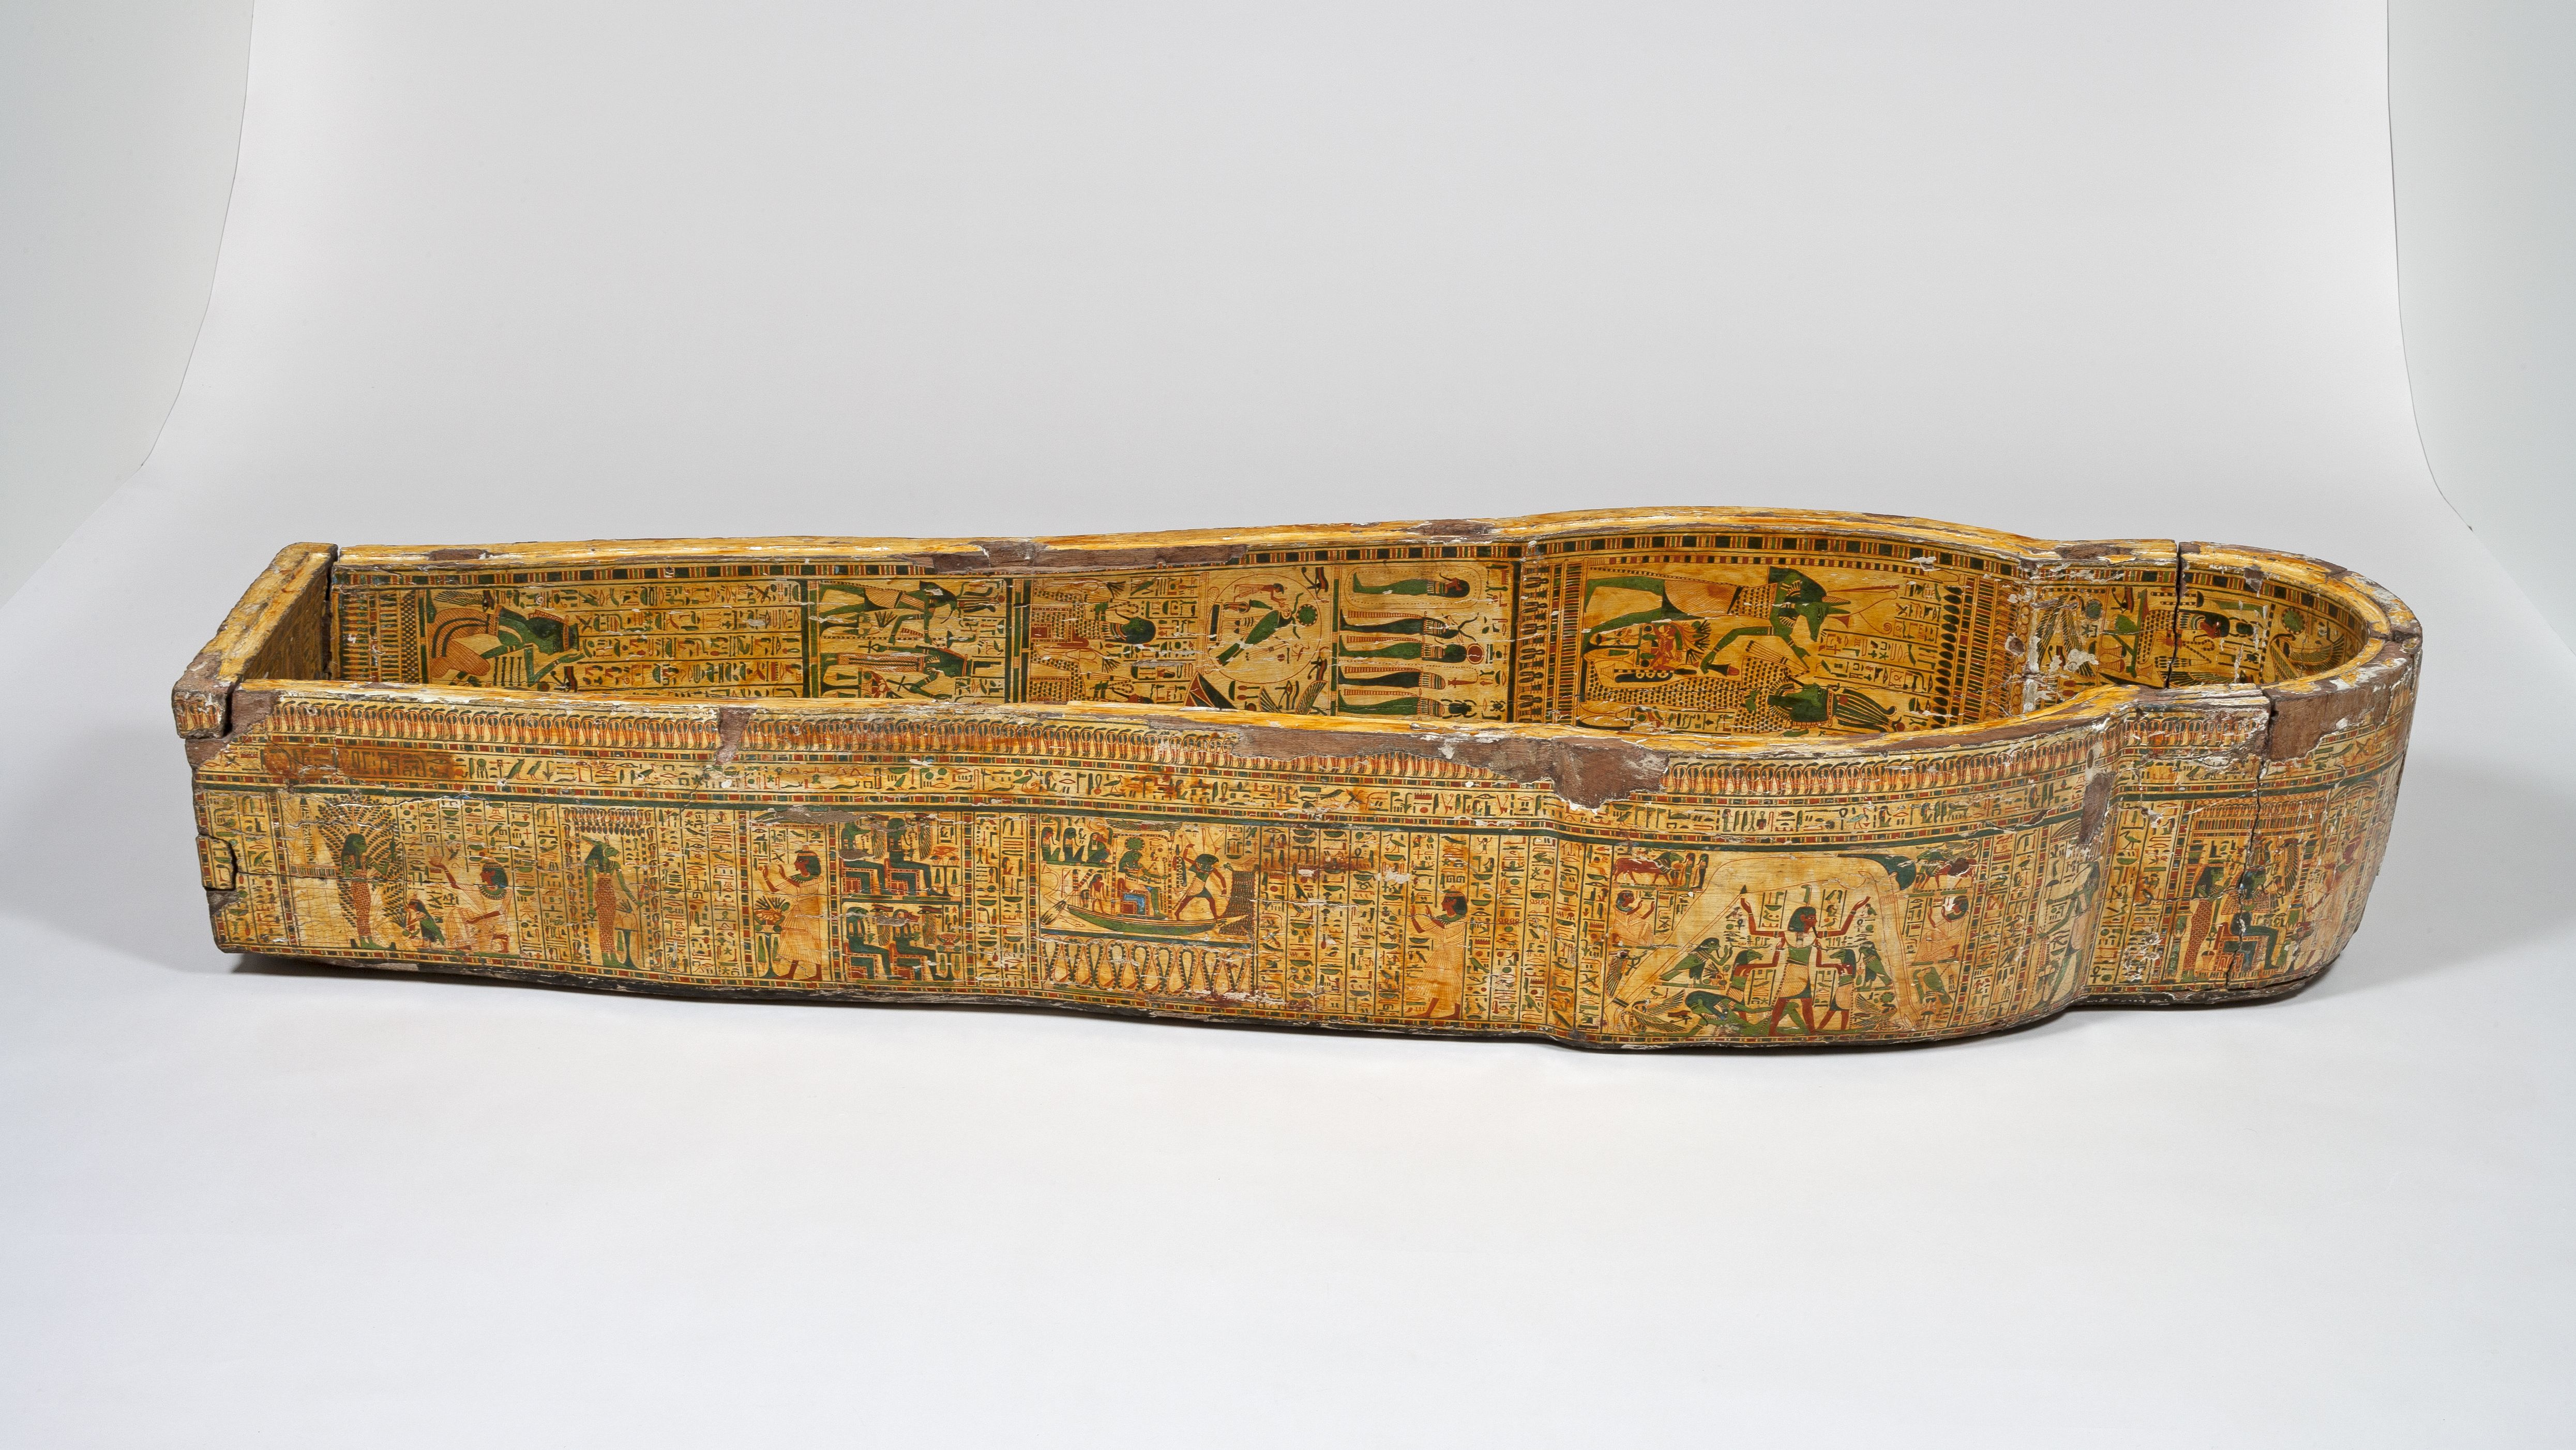 The set of coffins, dating to about 1,000 BC, underwent extensive examinations.